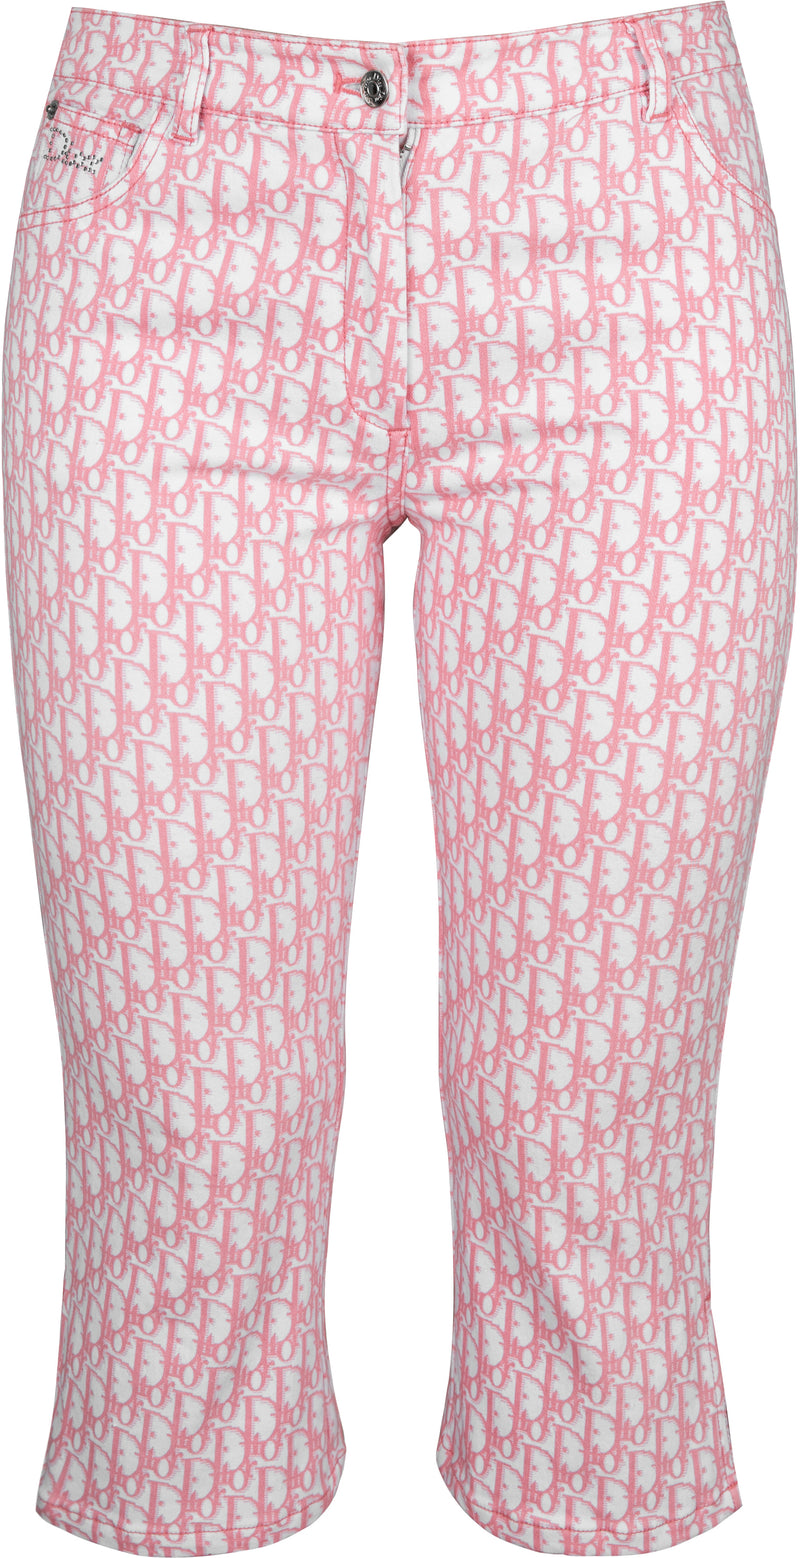 Christian Dior Diorissimo Girly Embellished Cropped Pants